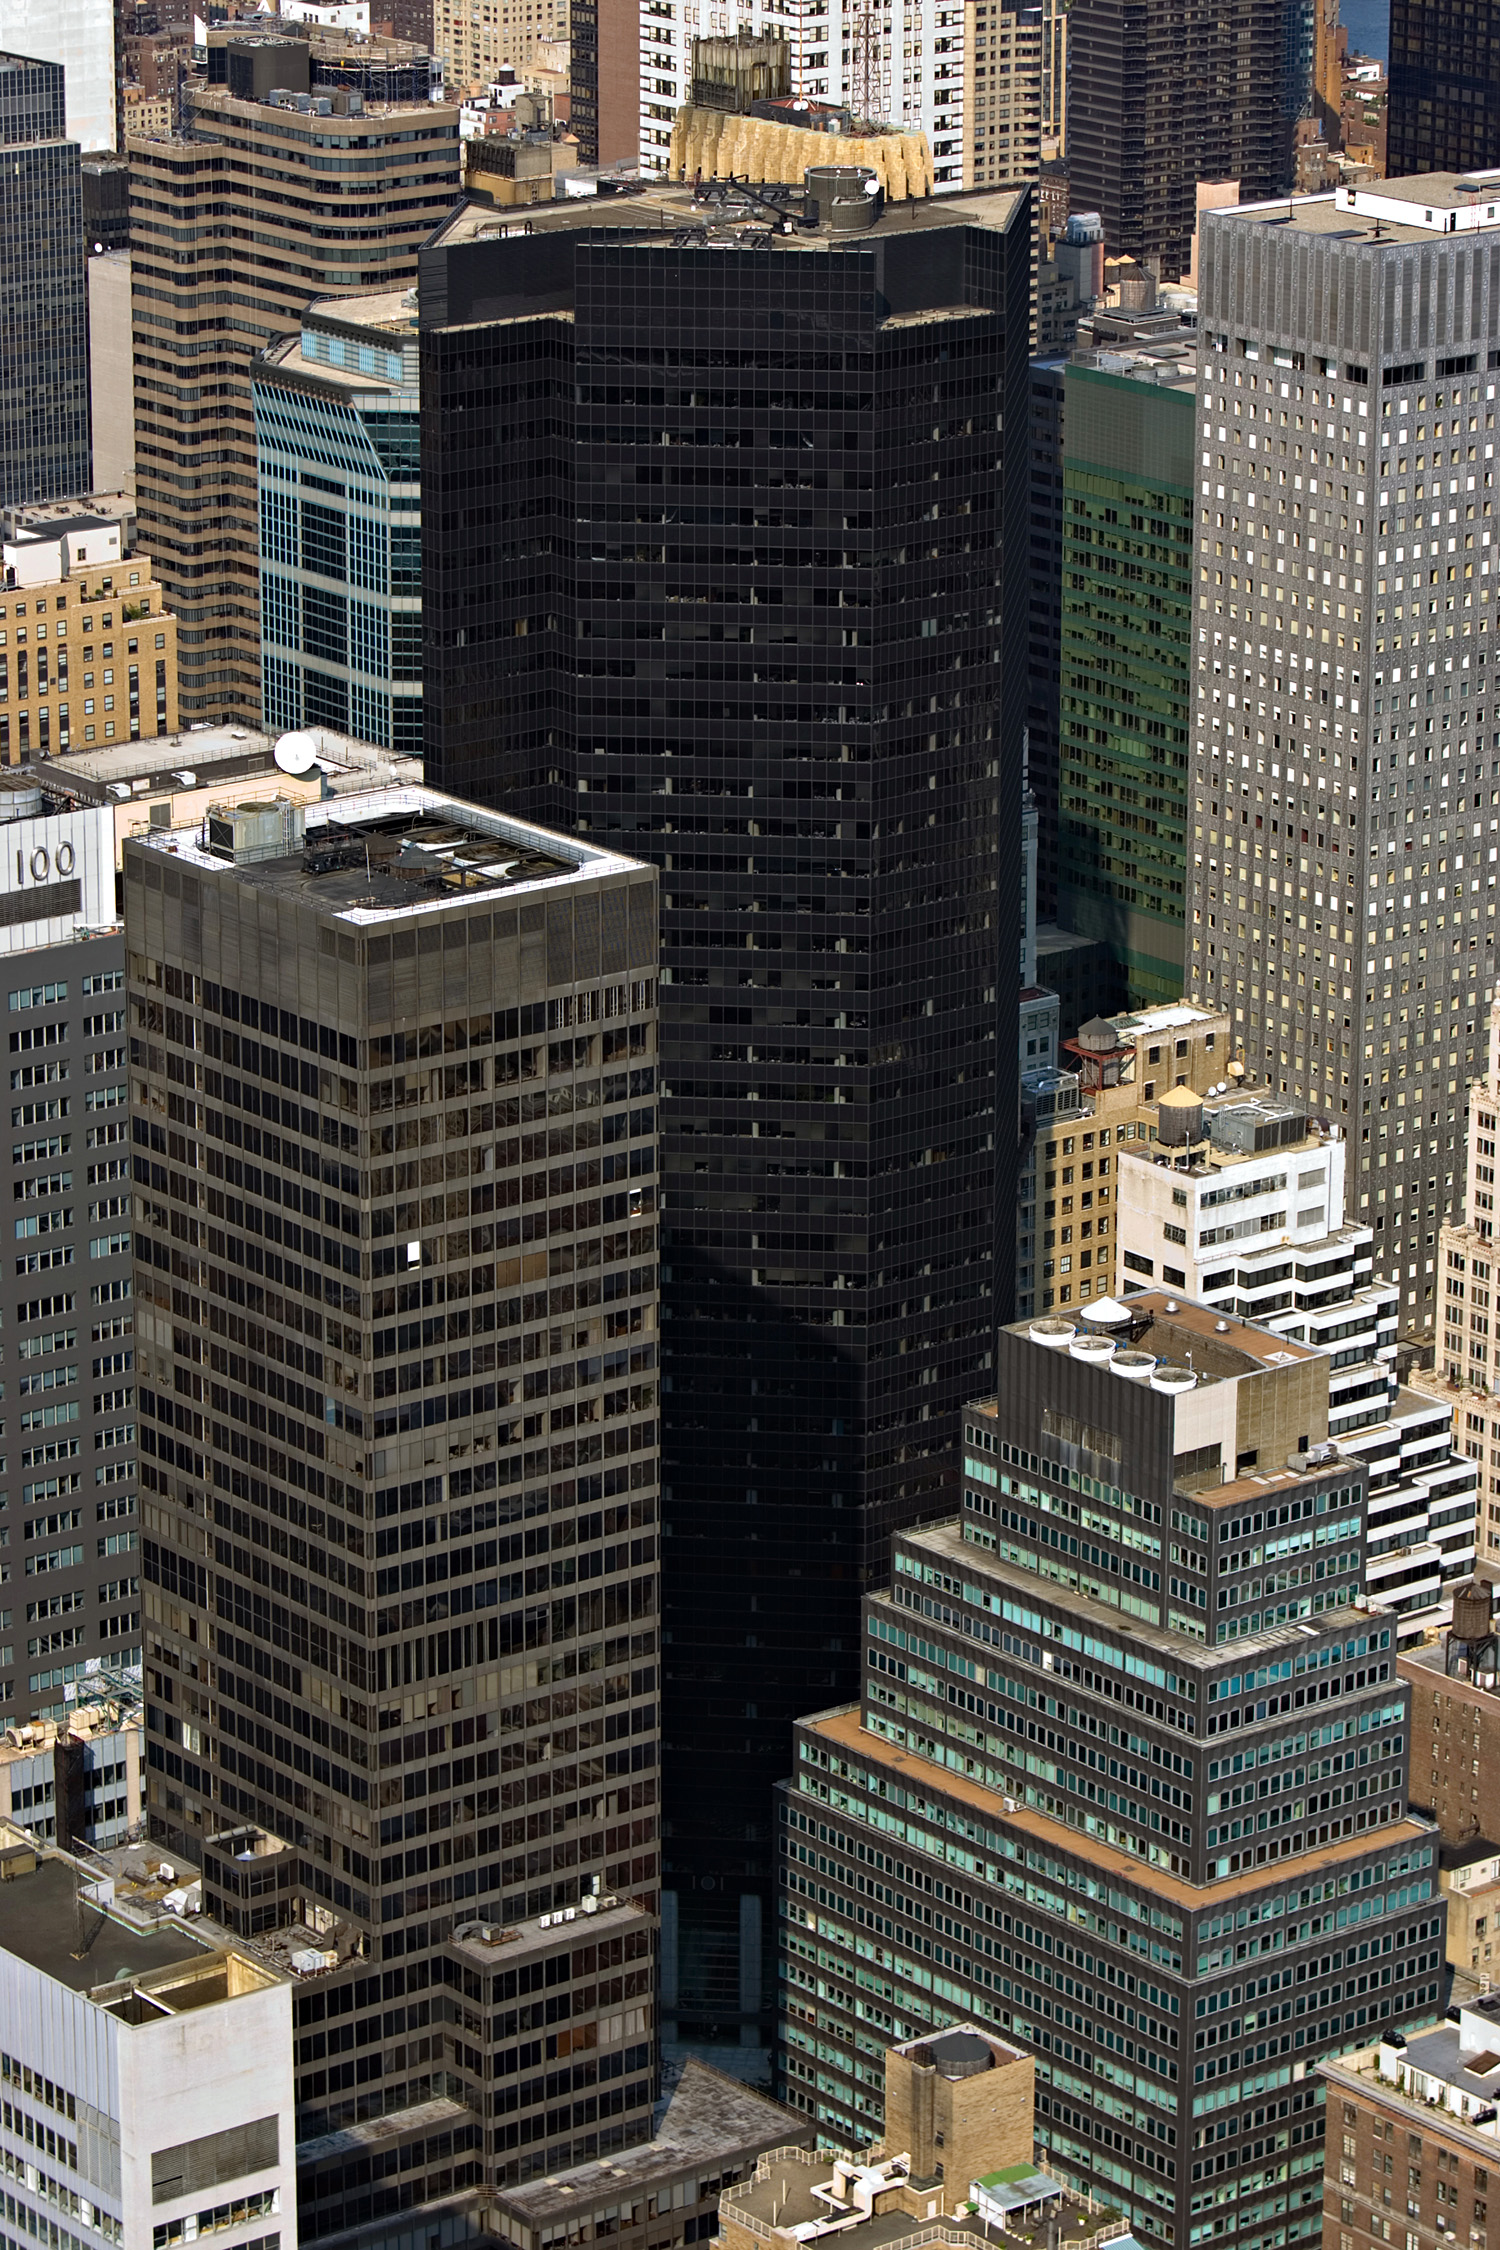 101 Park Avenue, New York City - View from Empire State Building. © Mathias Beinling